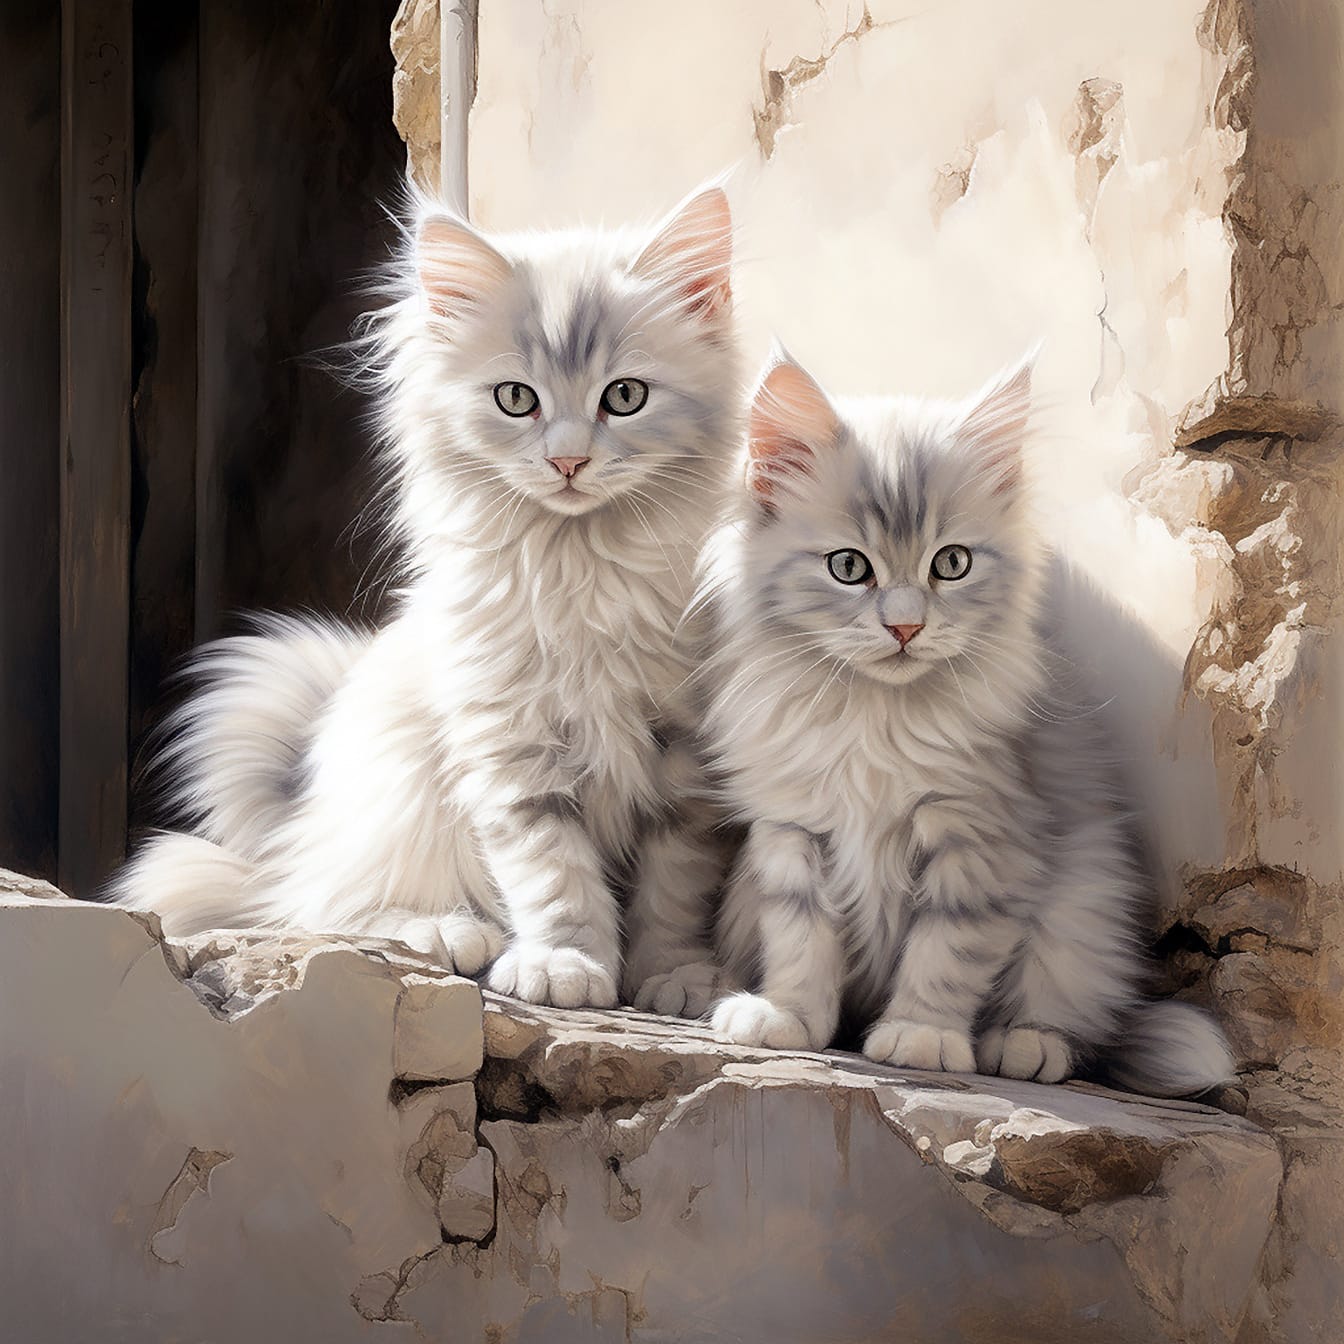 Furry grey kittens sitting on decay wall realistic illustration